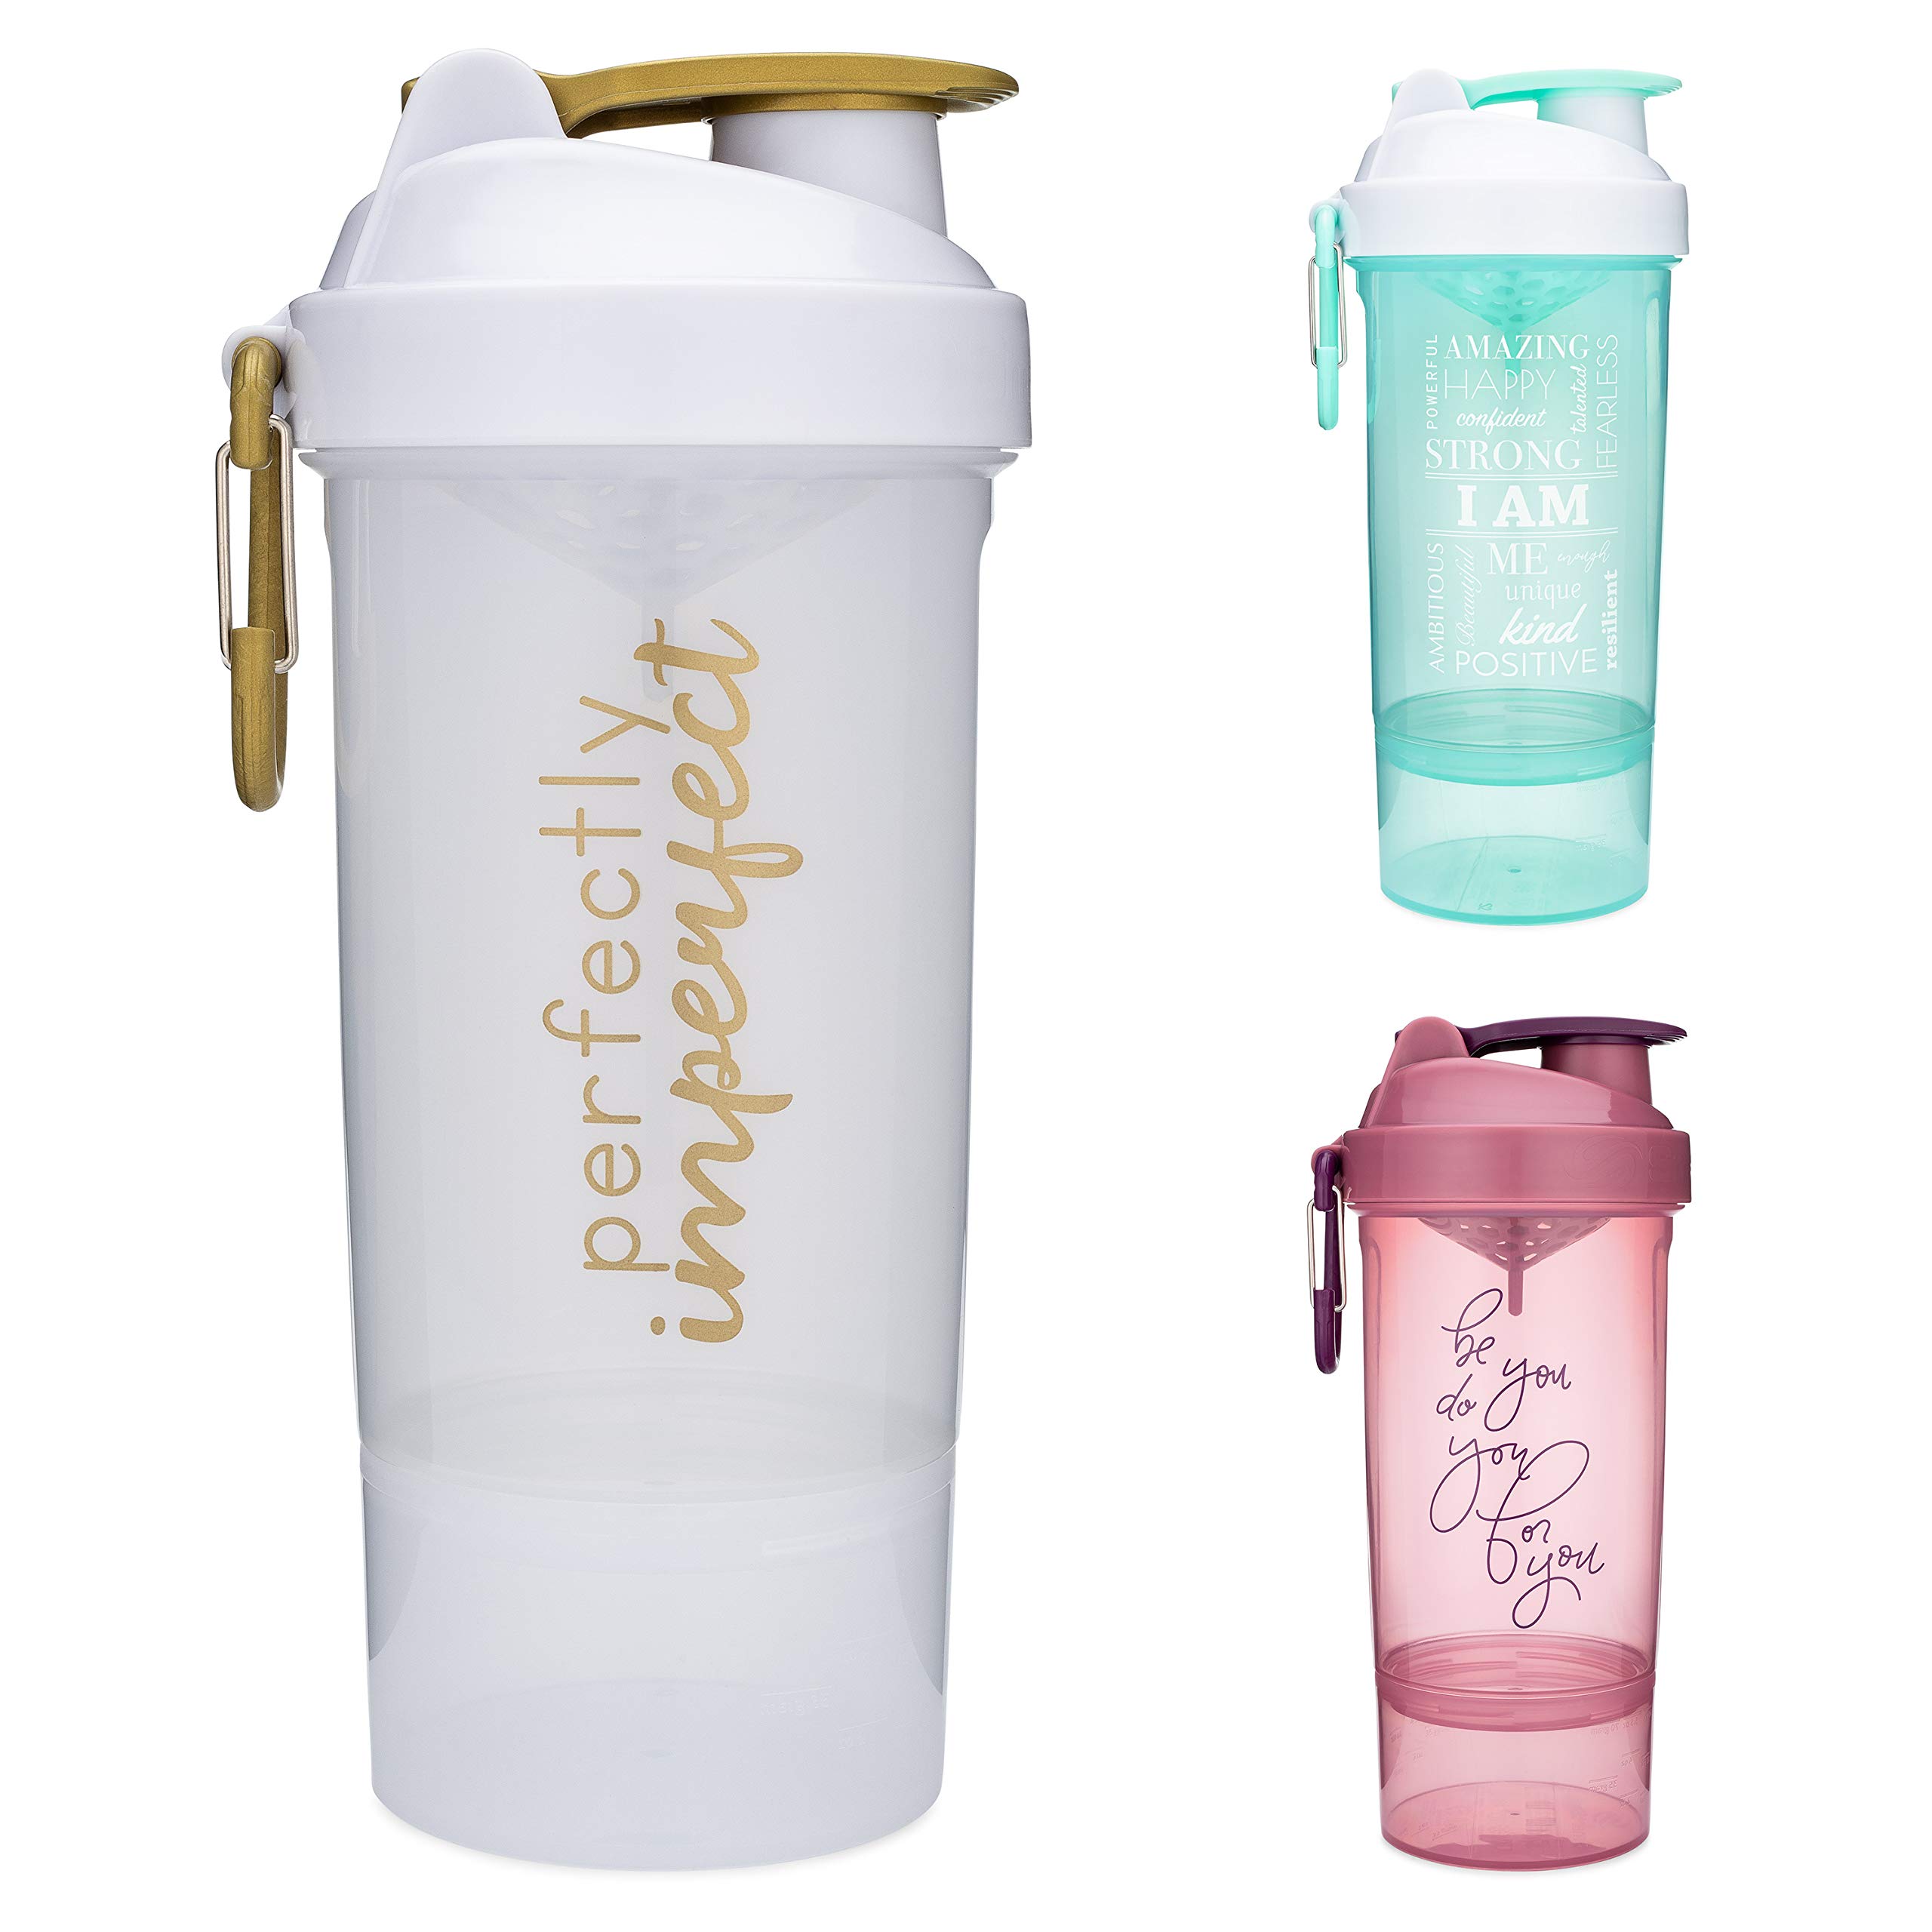 GOMOYO Shaker Bottle with Motivational Quotes | 27 Ounce Protein Shaker Cup  with Mixer Net | Attacha…See more GOMOYO Shaker Bottle with Motivational